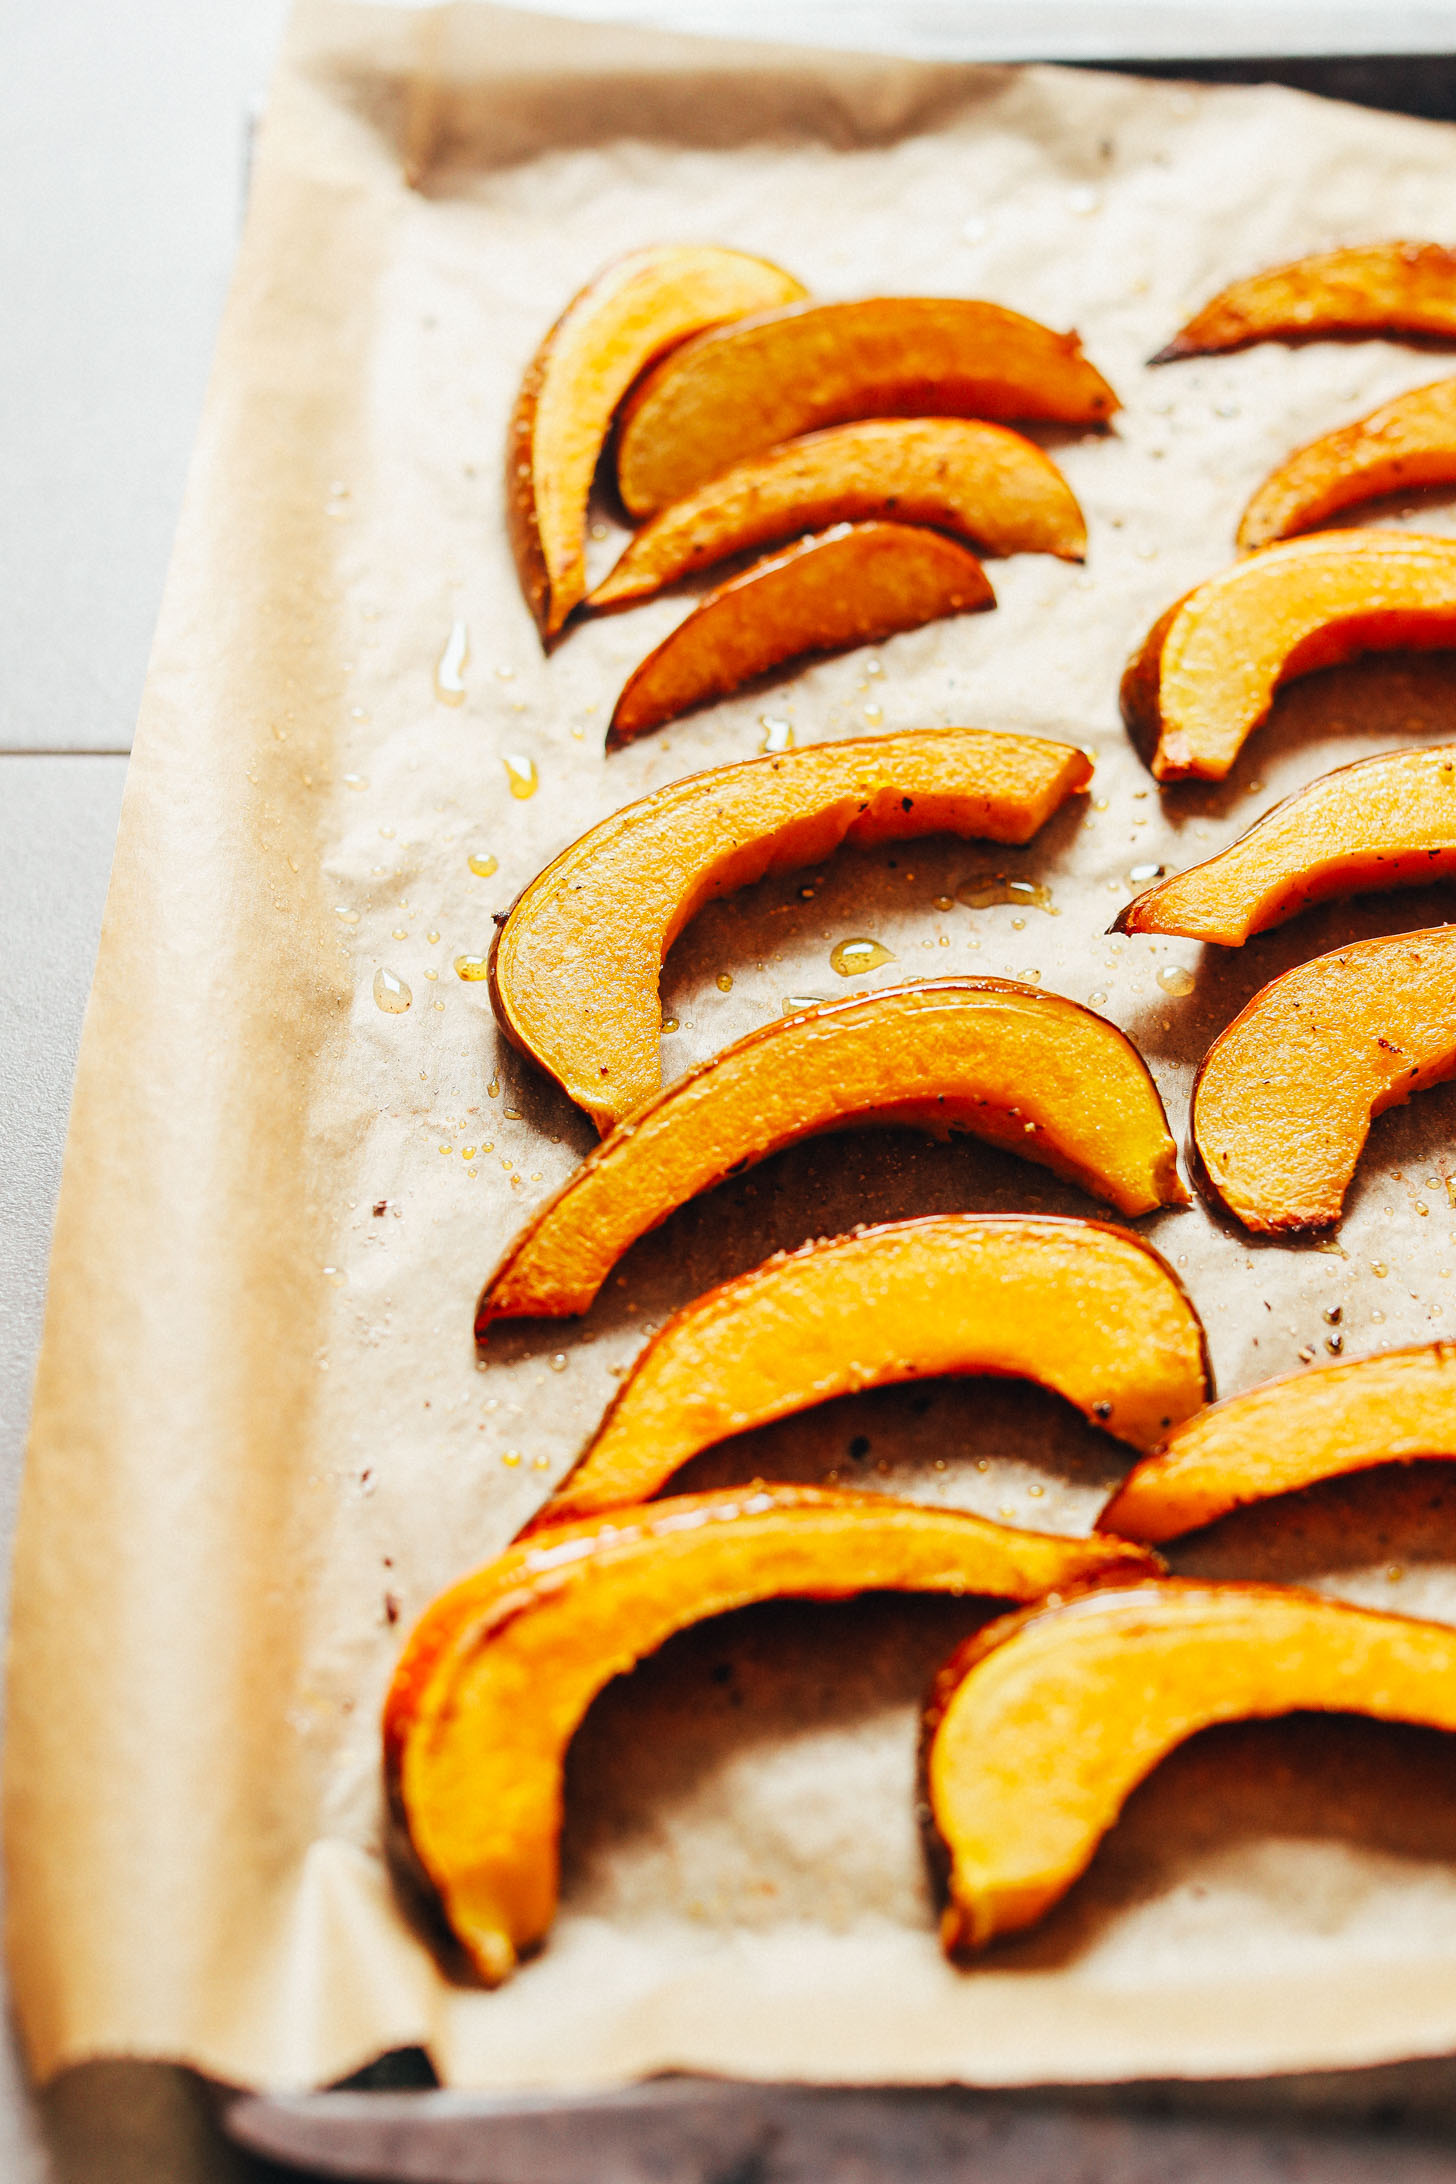 Roasted acorn squash slices on a parchment-lined baking sheet